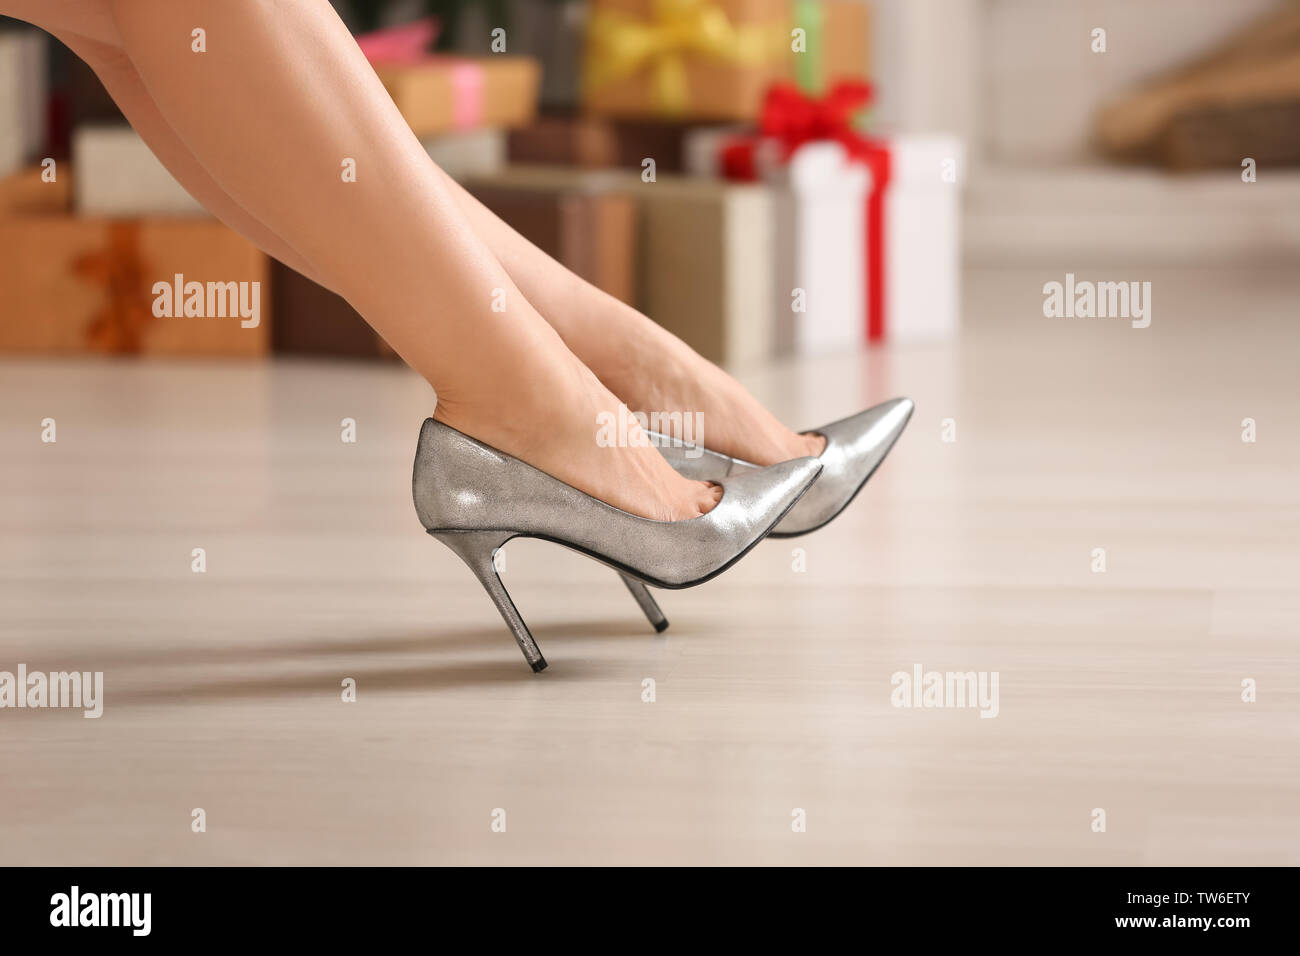 Woman in high heel shoes at home Stock Photo